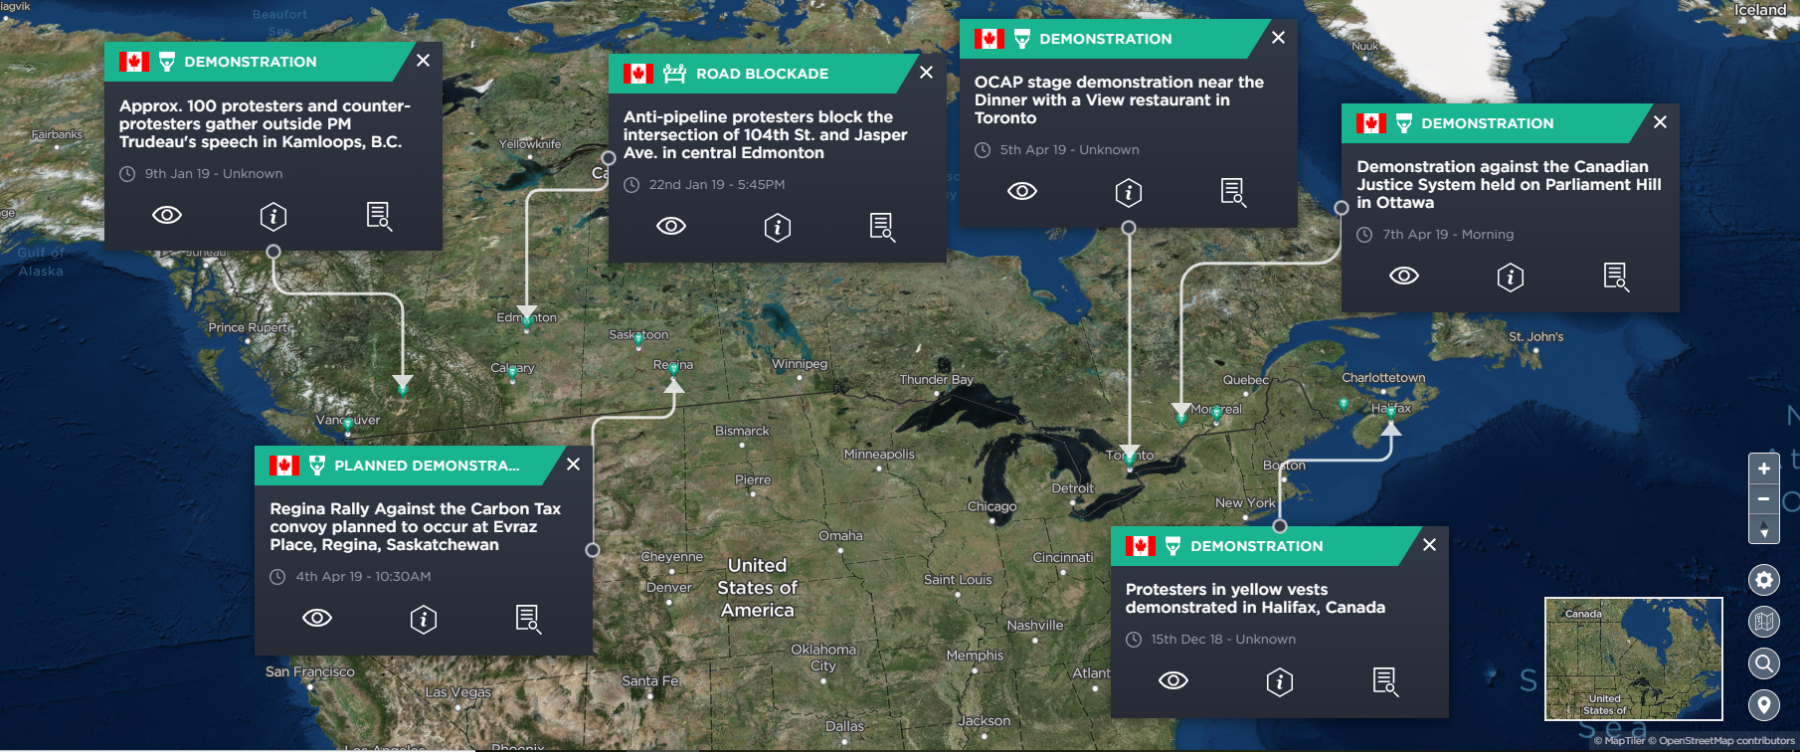 A map showing the various yellow vest protests and pipeline demonstration in Canada throughout 2019